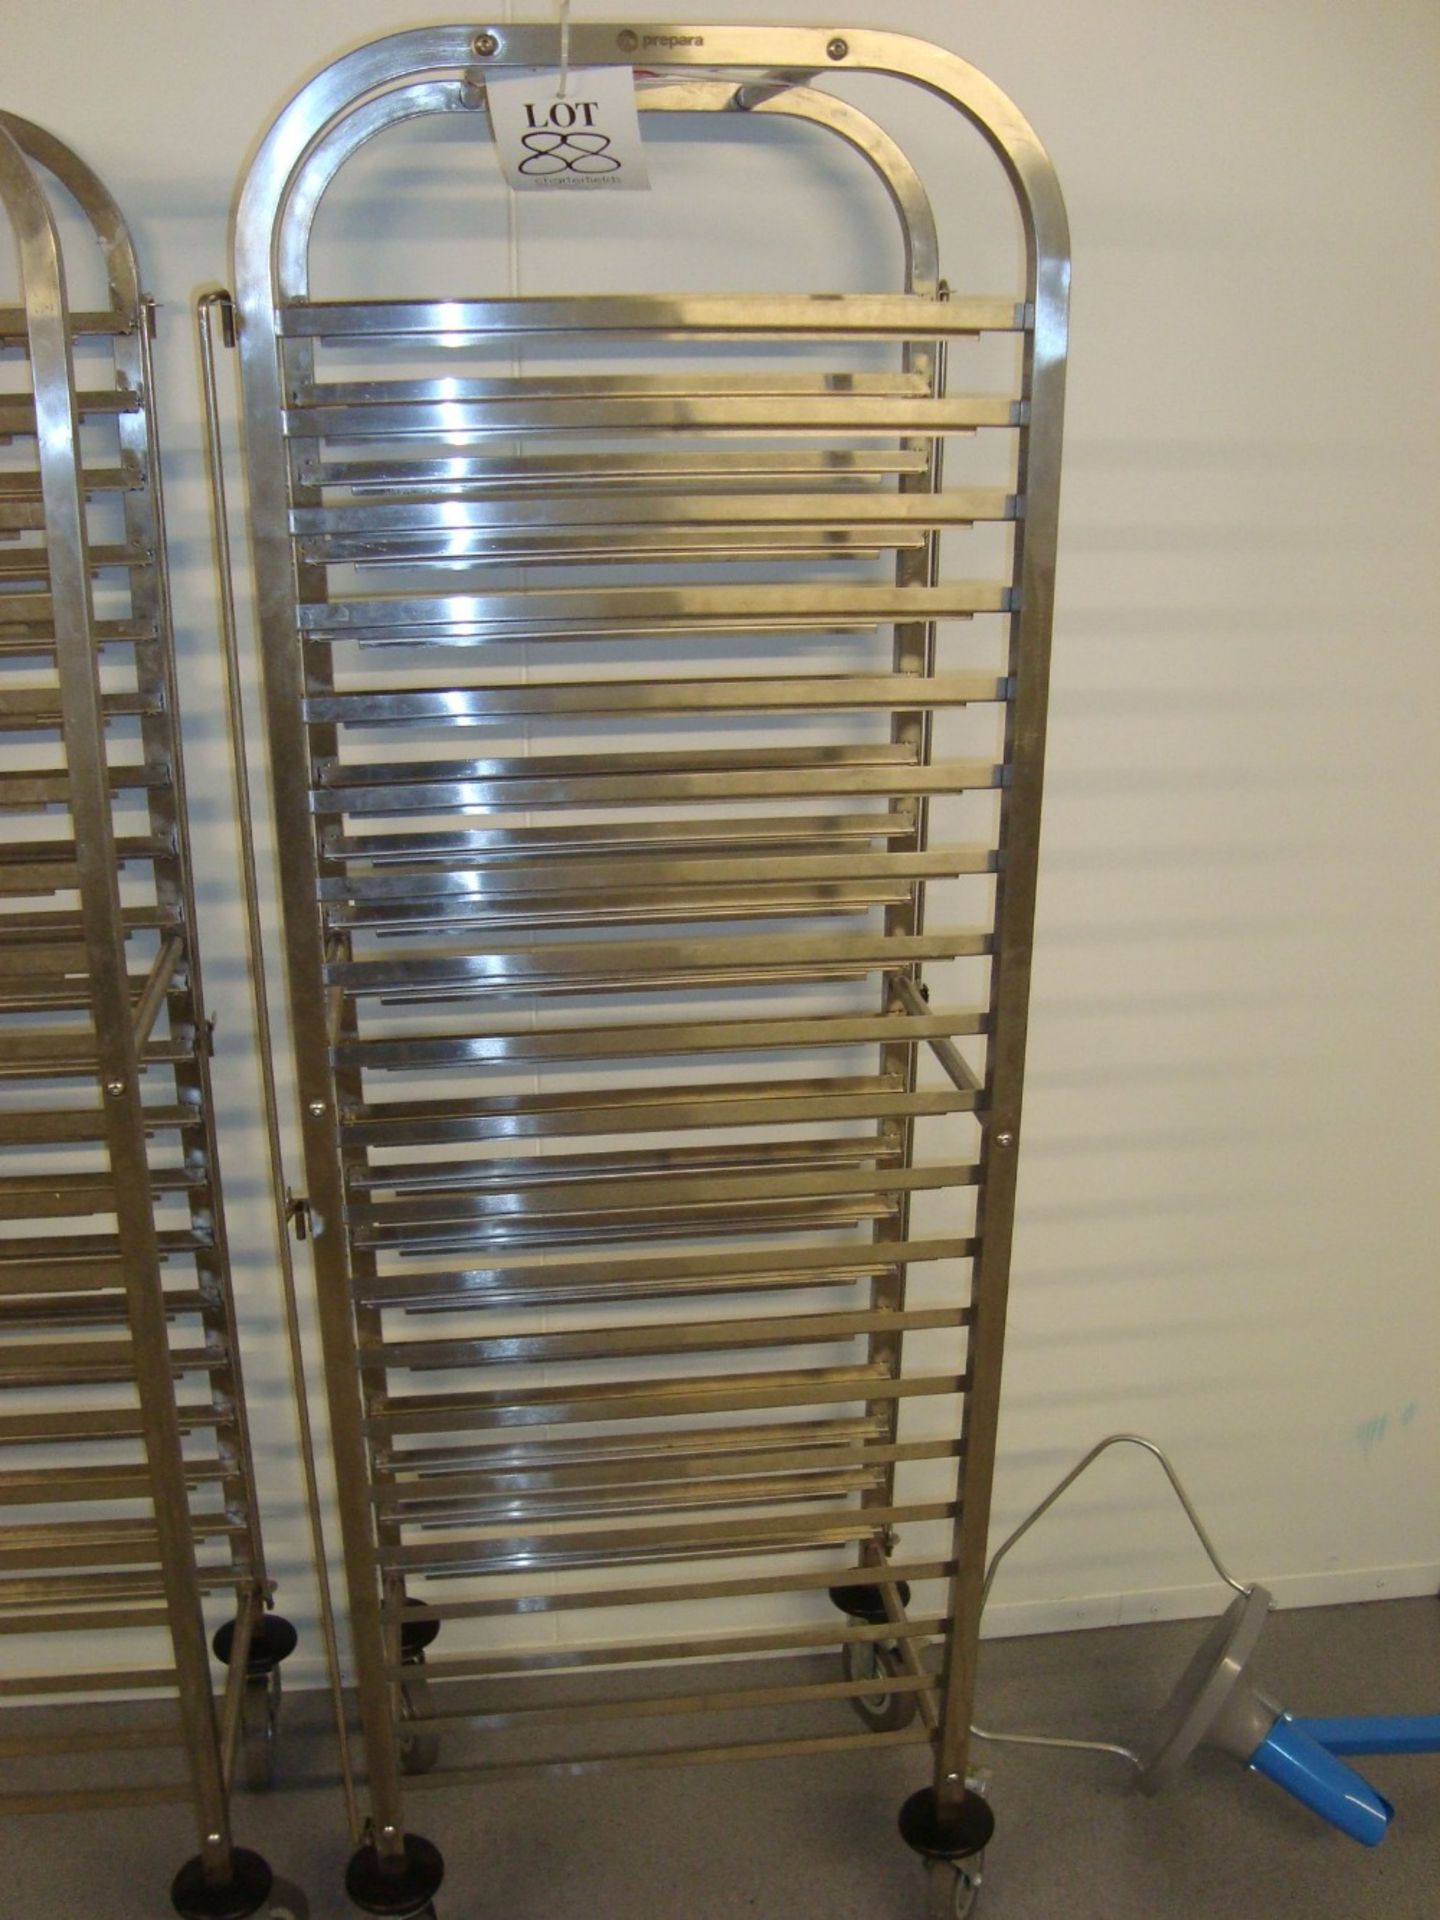 A Prepara mobile stainless steel full height tray rack